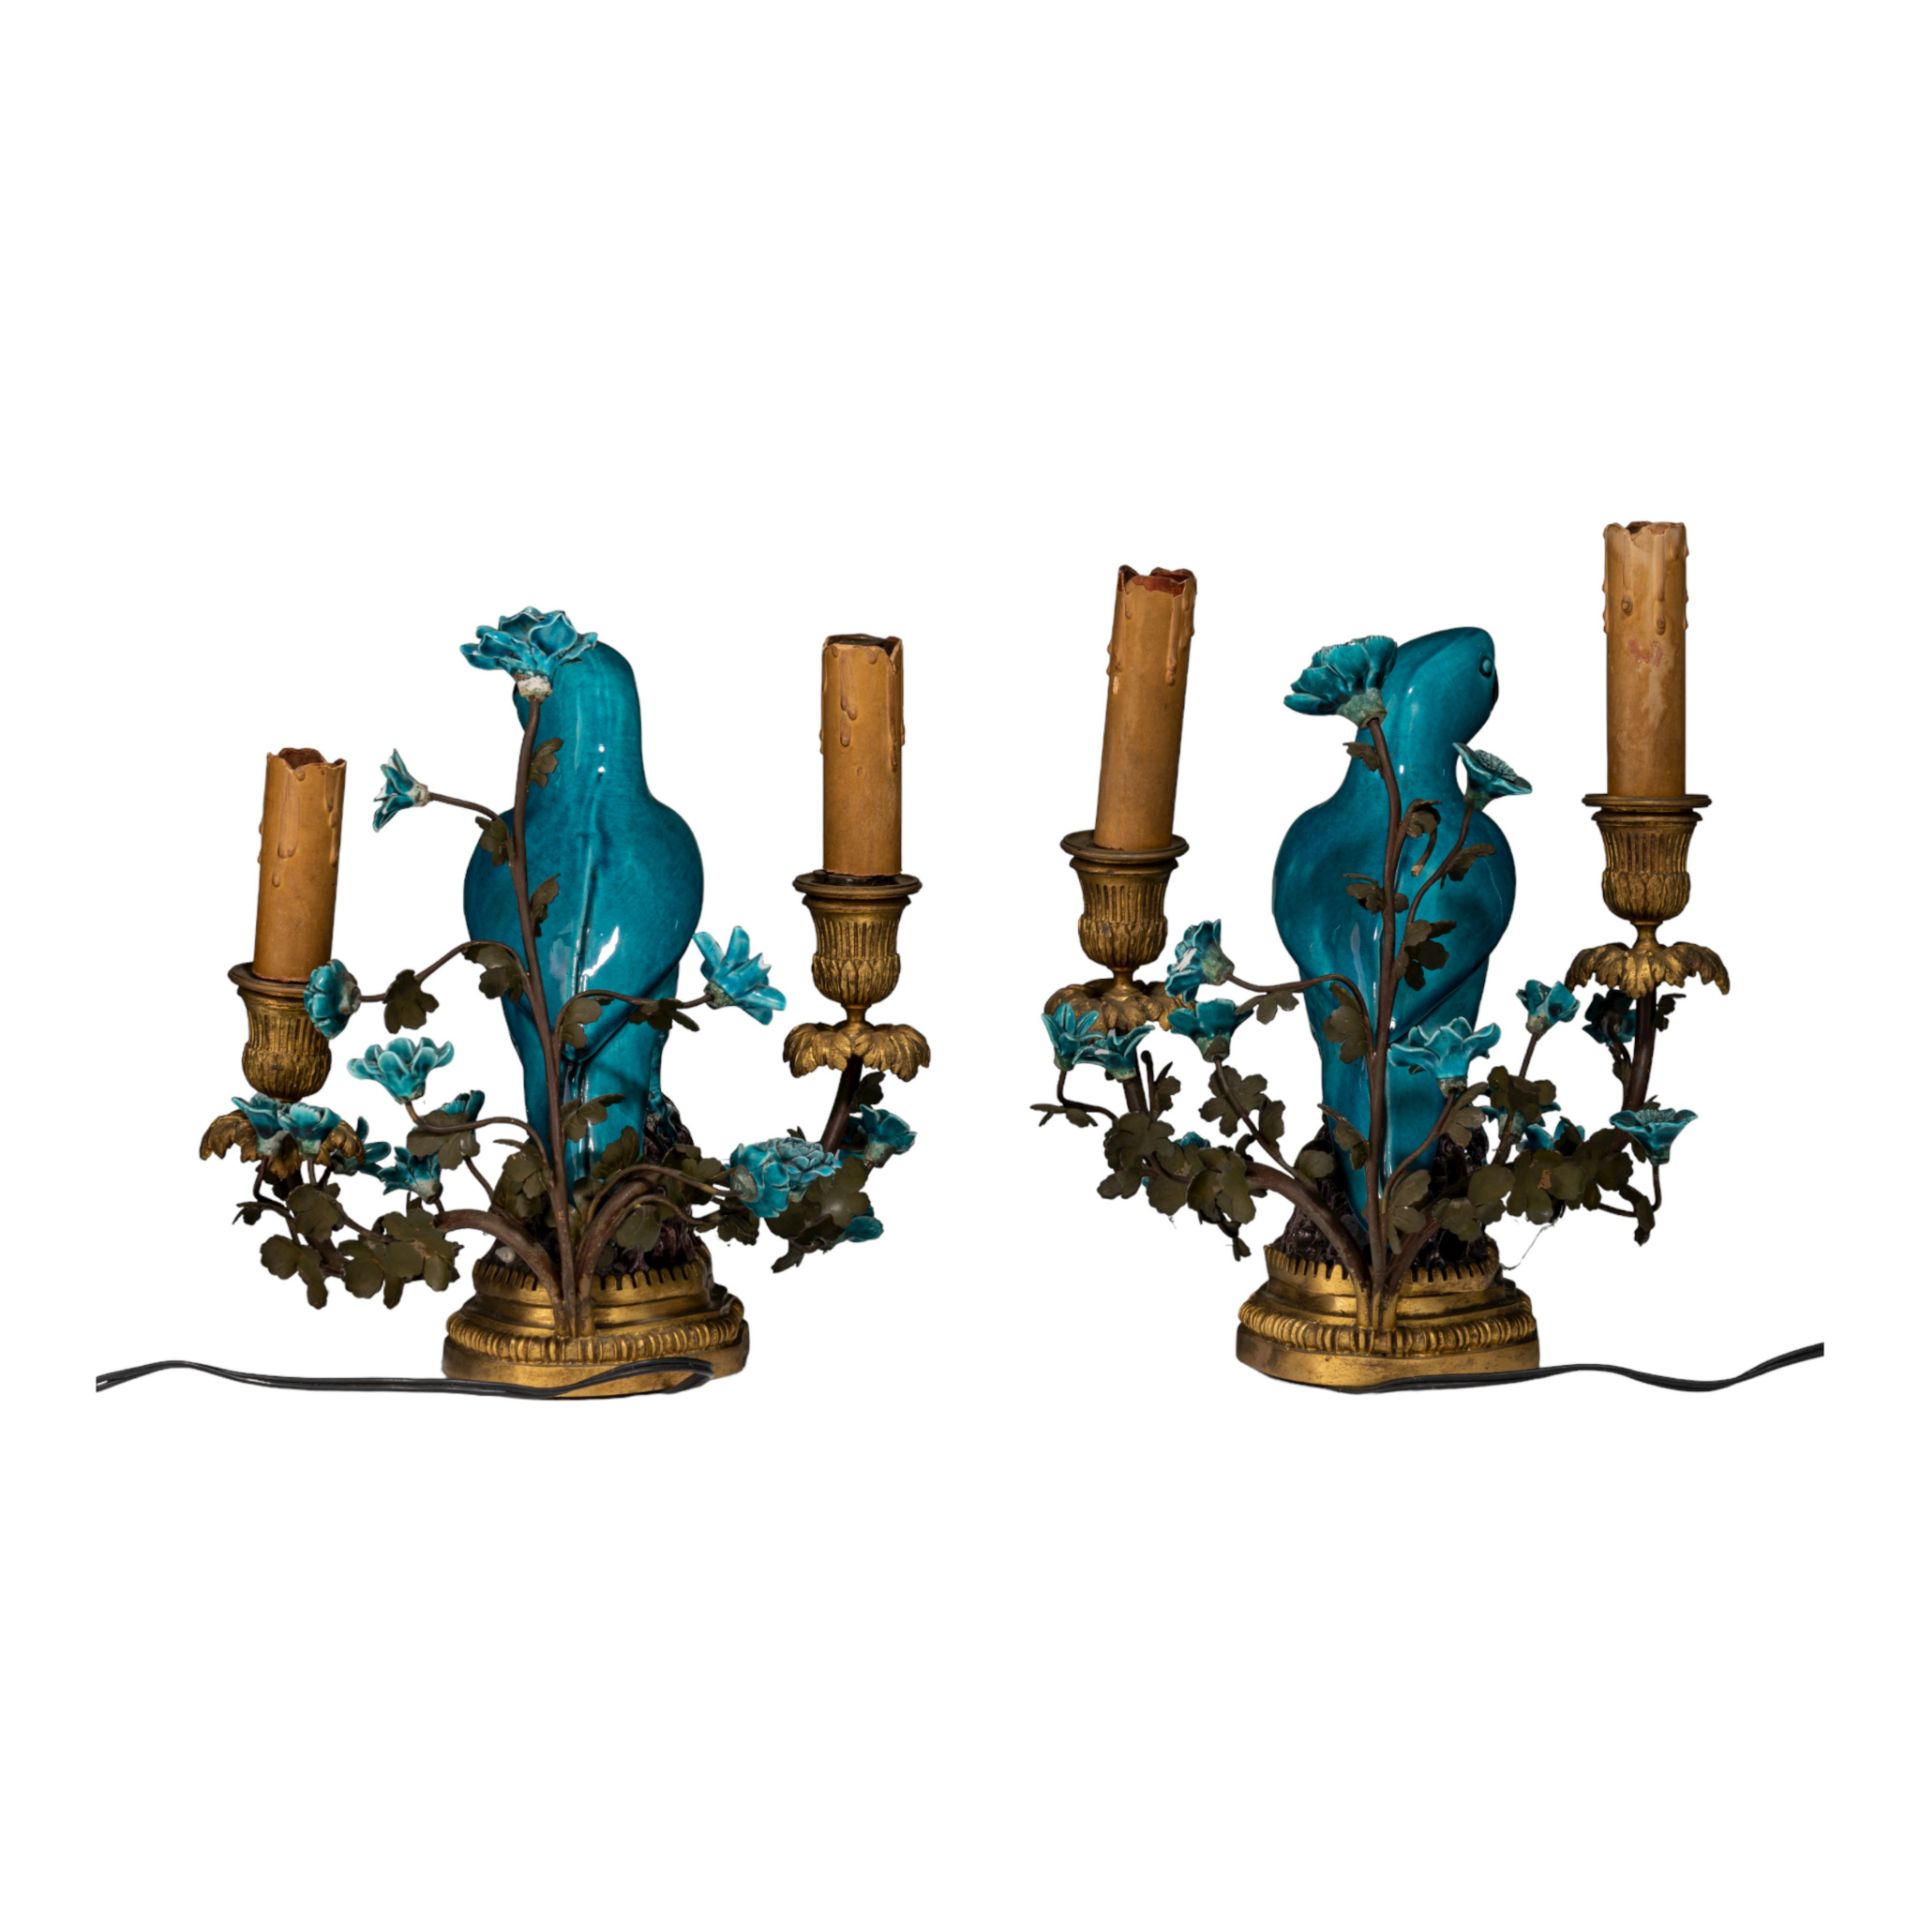 A pair of table lamps, brass-mounted porcelain parrots, marked Samson, late 19thC, H 26 - 28 cm - Image 4 of 12